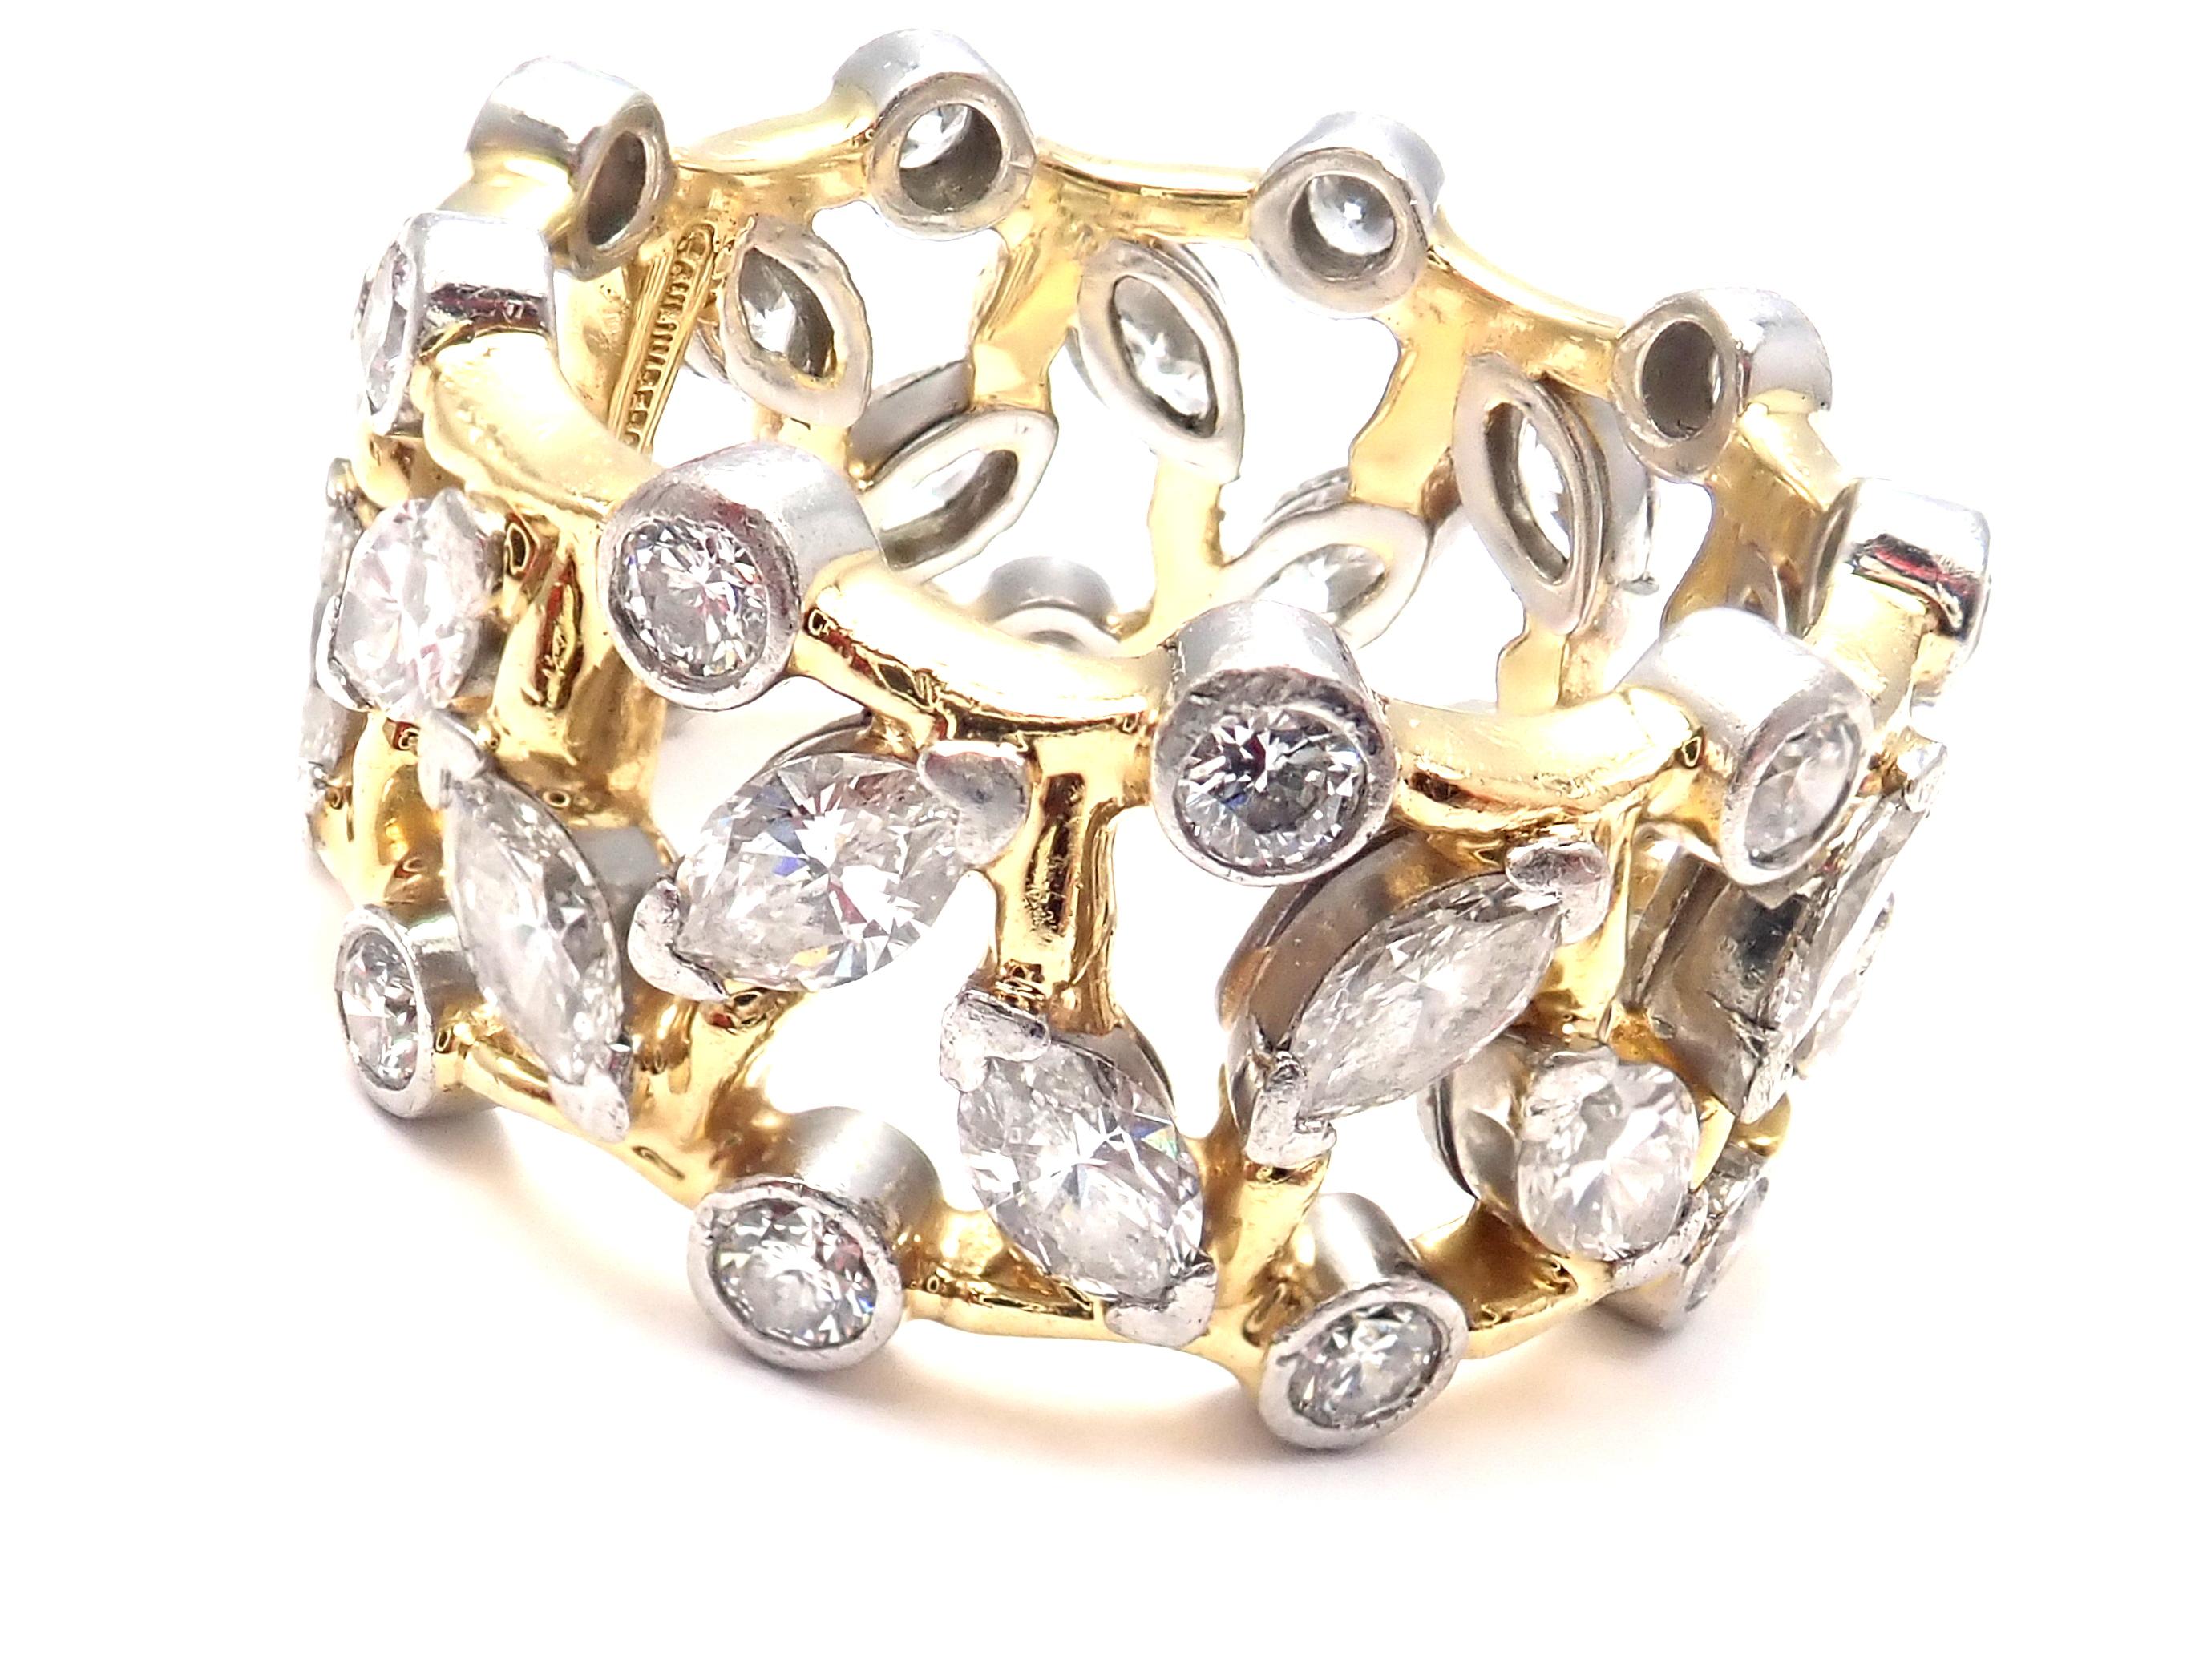 18k Yellow Gold & Platinum Diamond Vigne Jean Schlumberger Band Ring designed for Tiffany & Co. 
With Round brilliant cut diamonds VS1 clarity, E color total weight approximately .73ct
Marquee cut diamonds total weight approximately